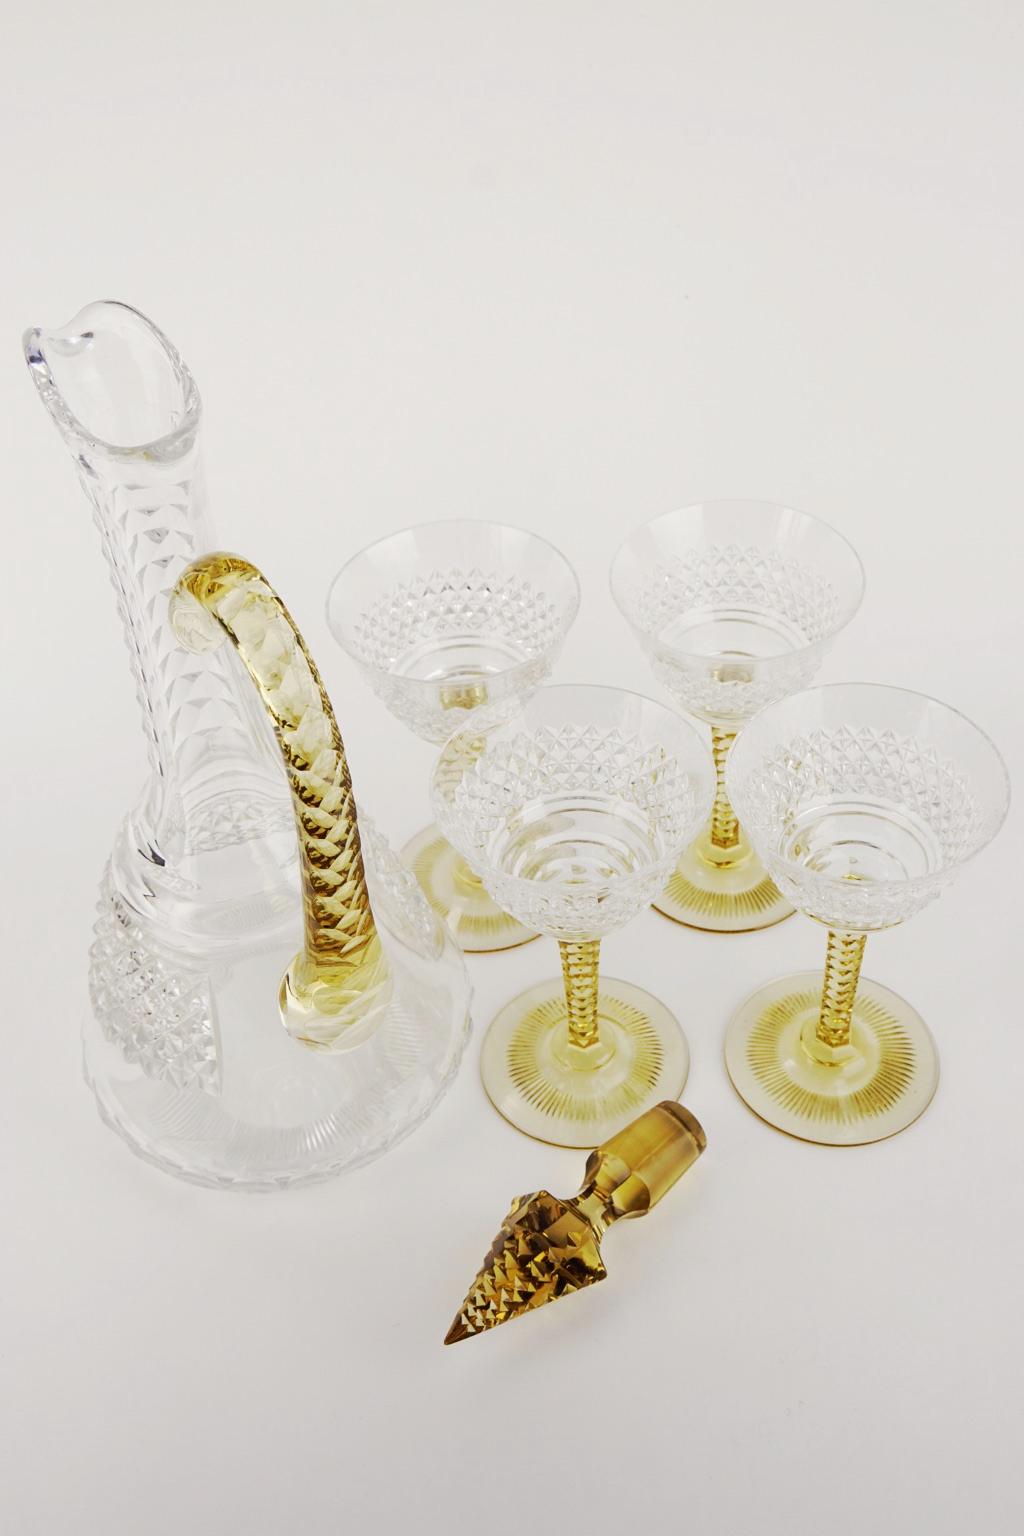 Art Deco Crystal Topaz and White Liquor Service Decanter and Glasses For Sale 5